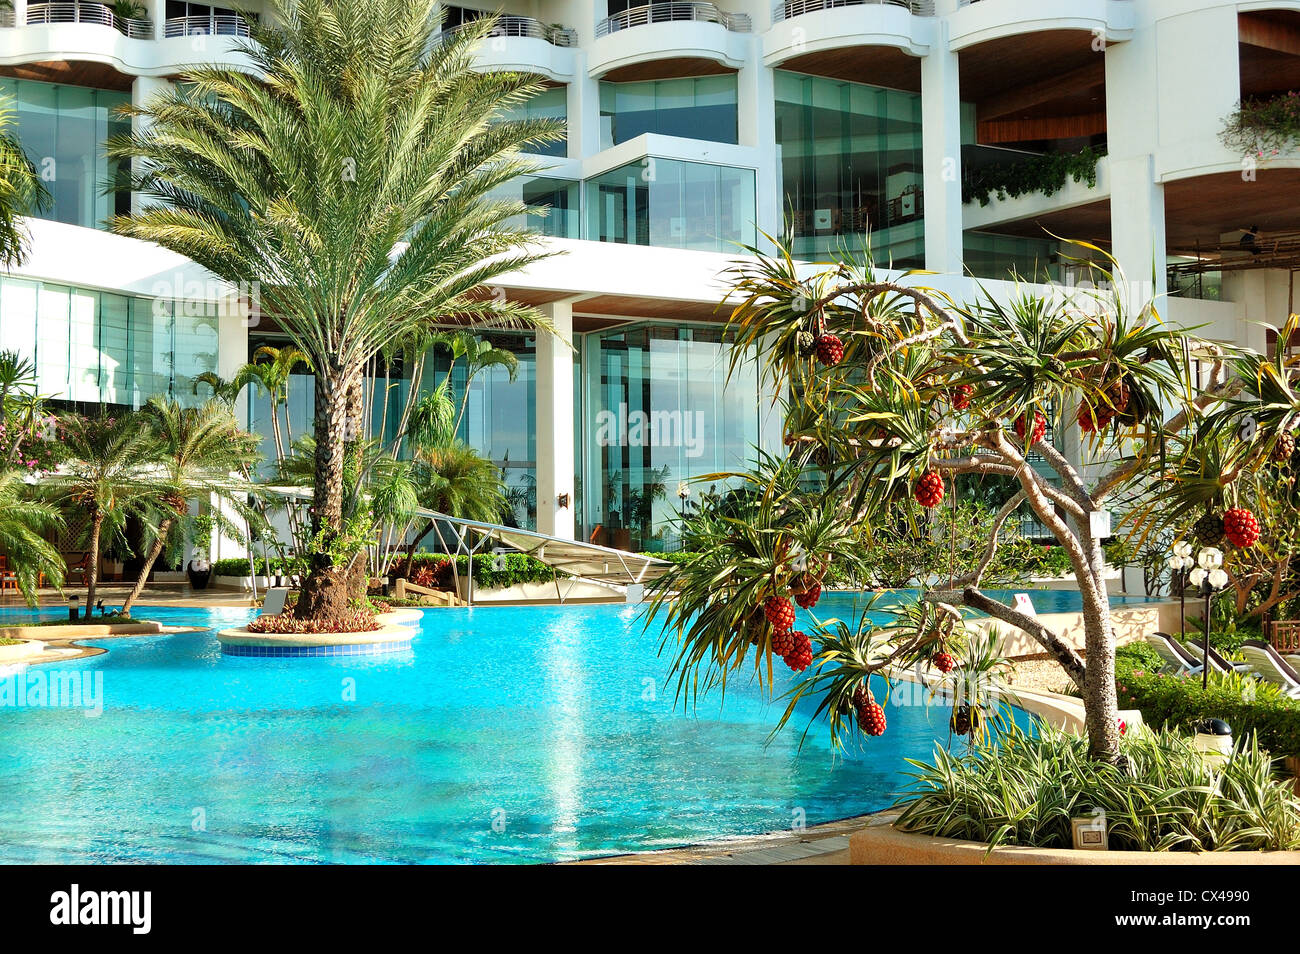 Swimming pool and palm trees at the luxury hotel, Pattaya, Thailand Stock Photo